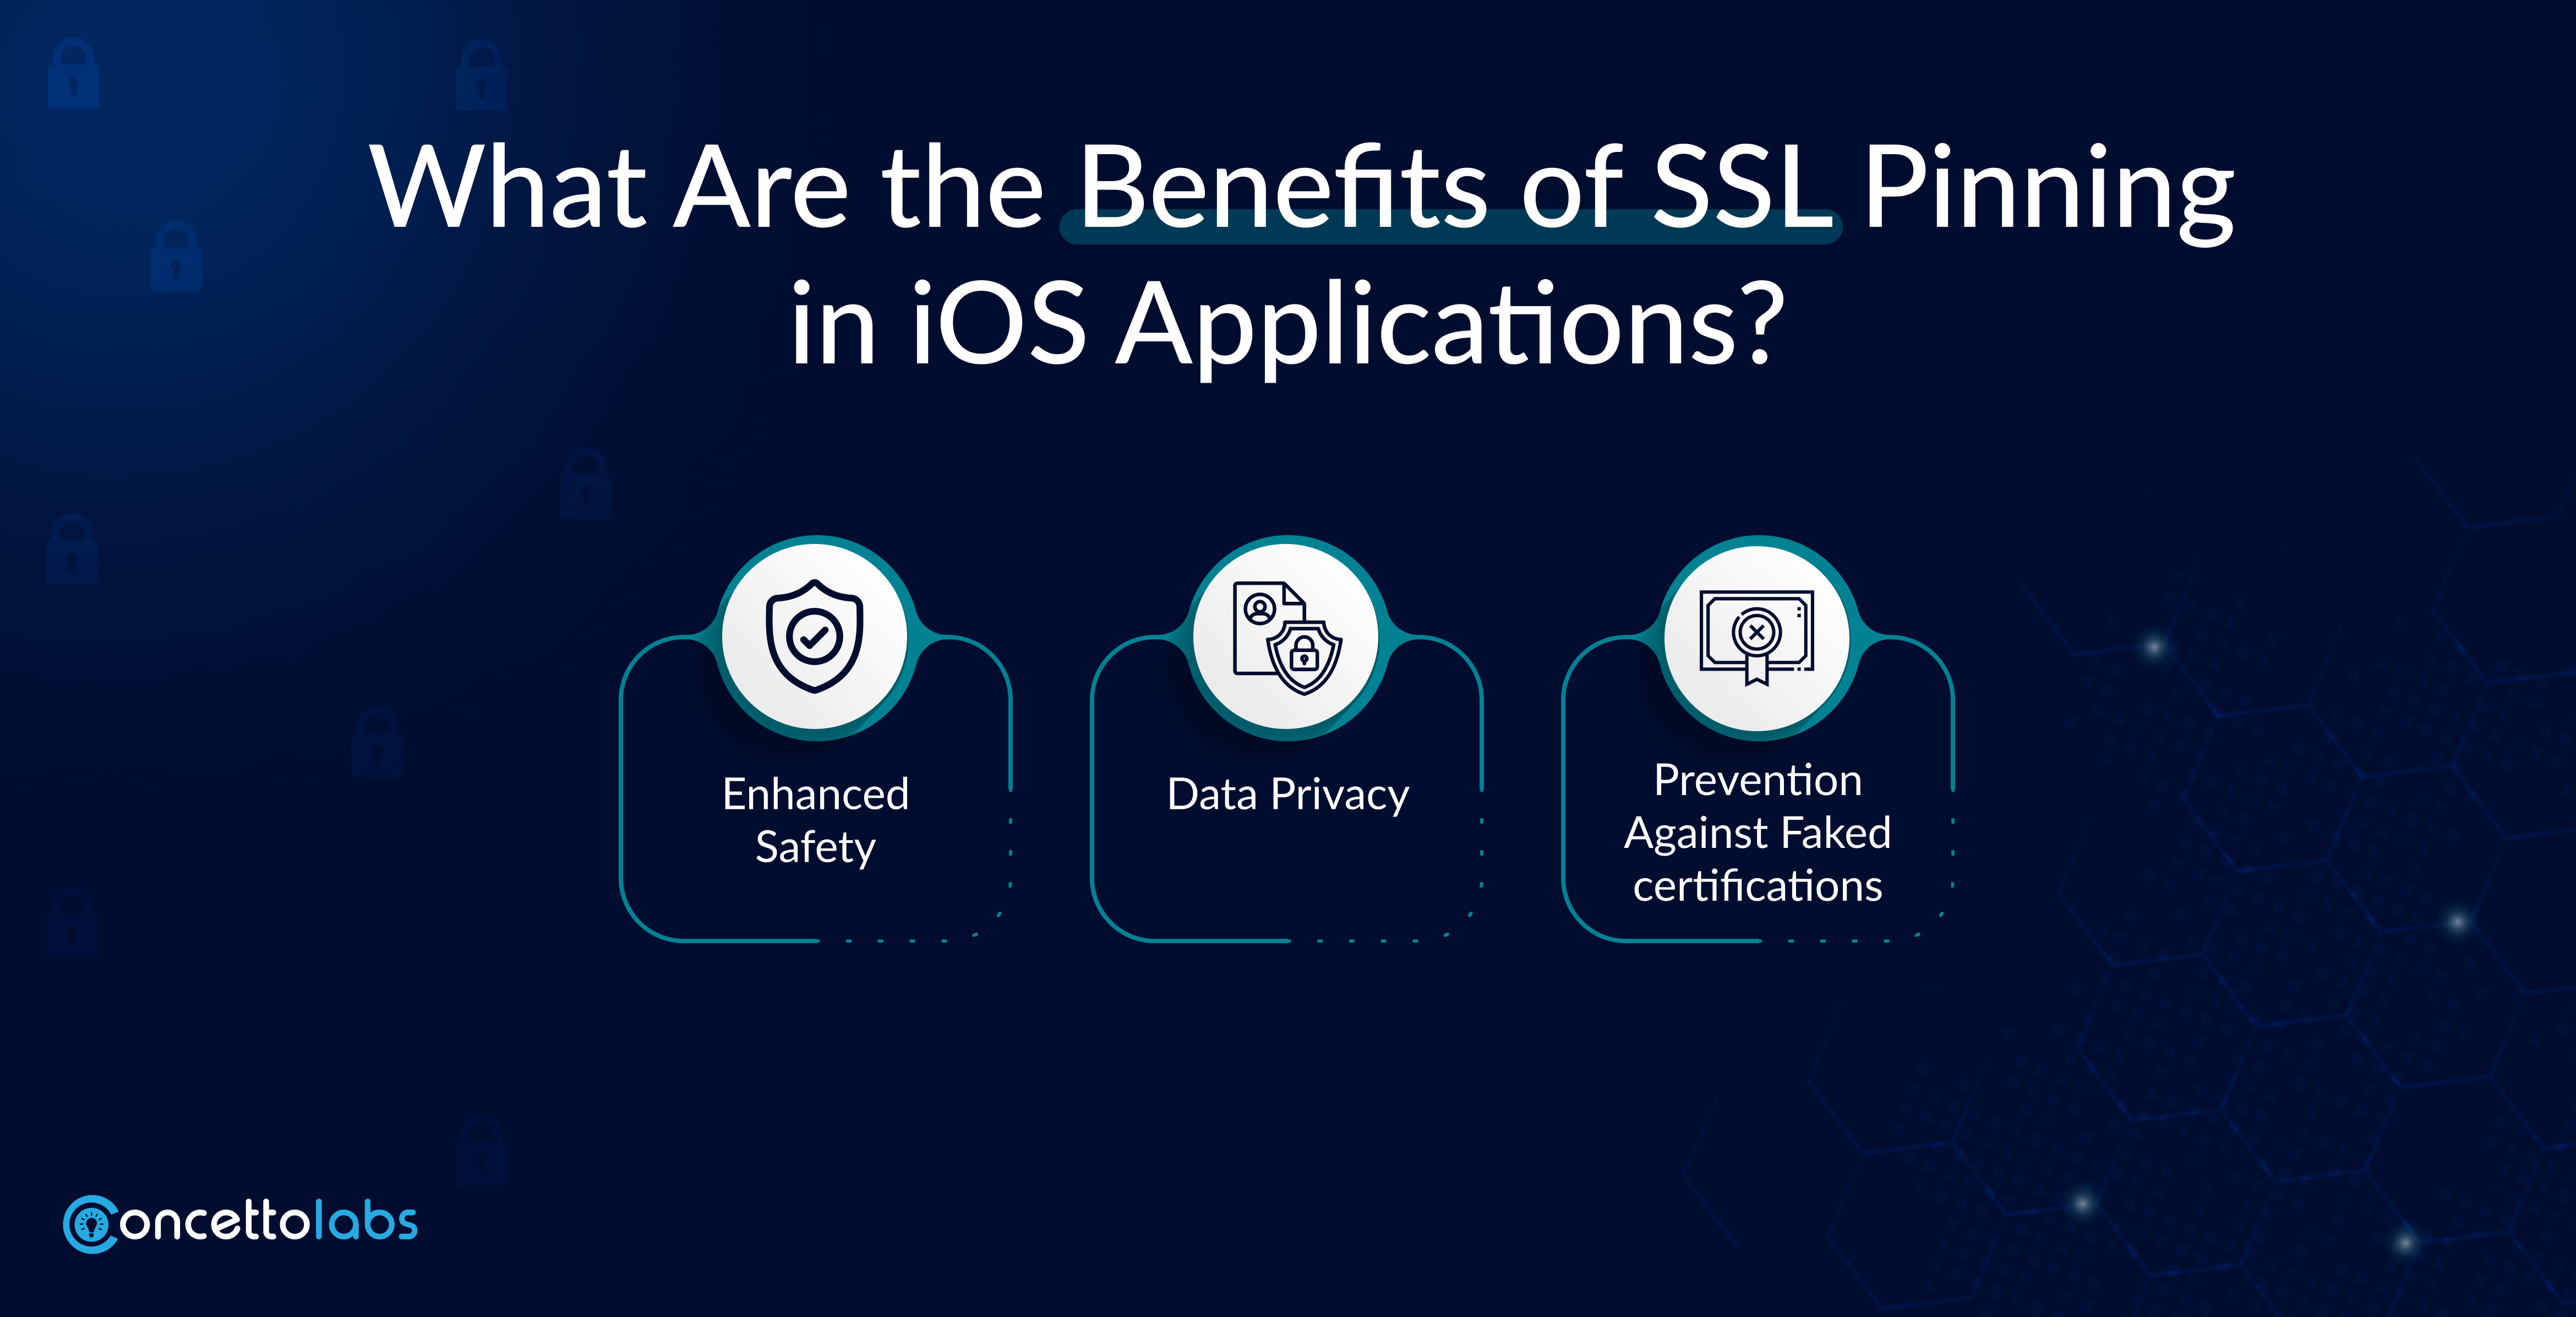 What Are the Benefits of SSL Pinning in iOS Applications?